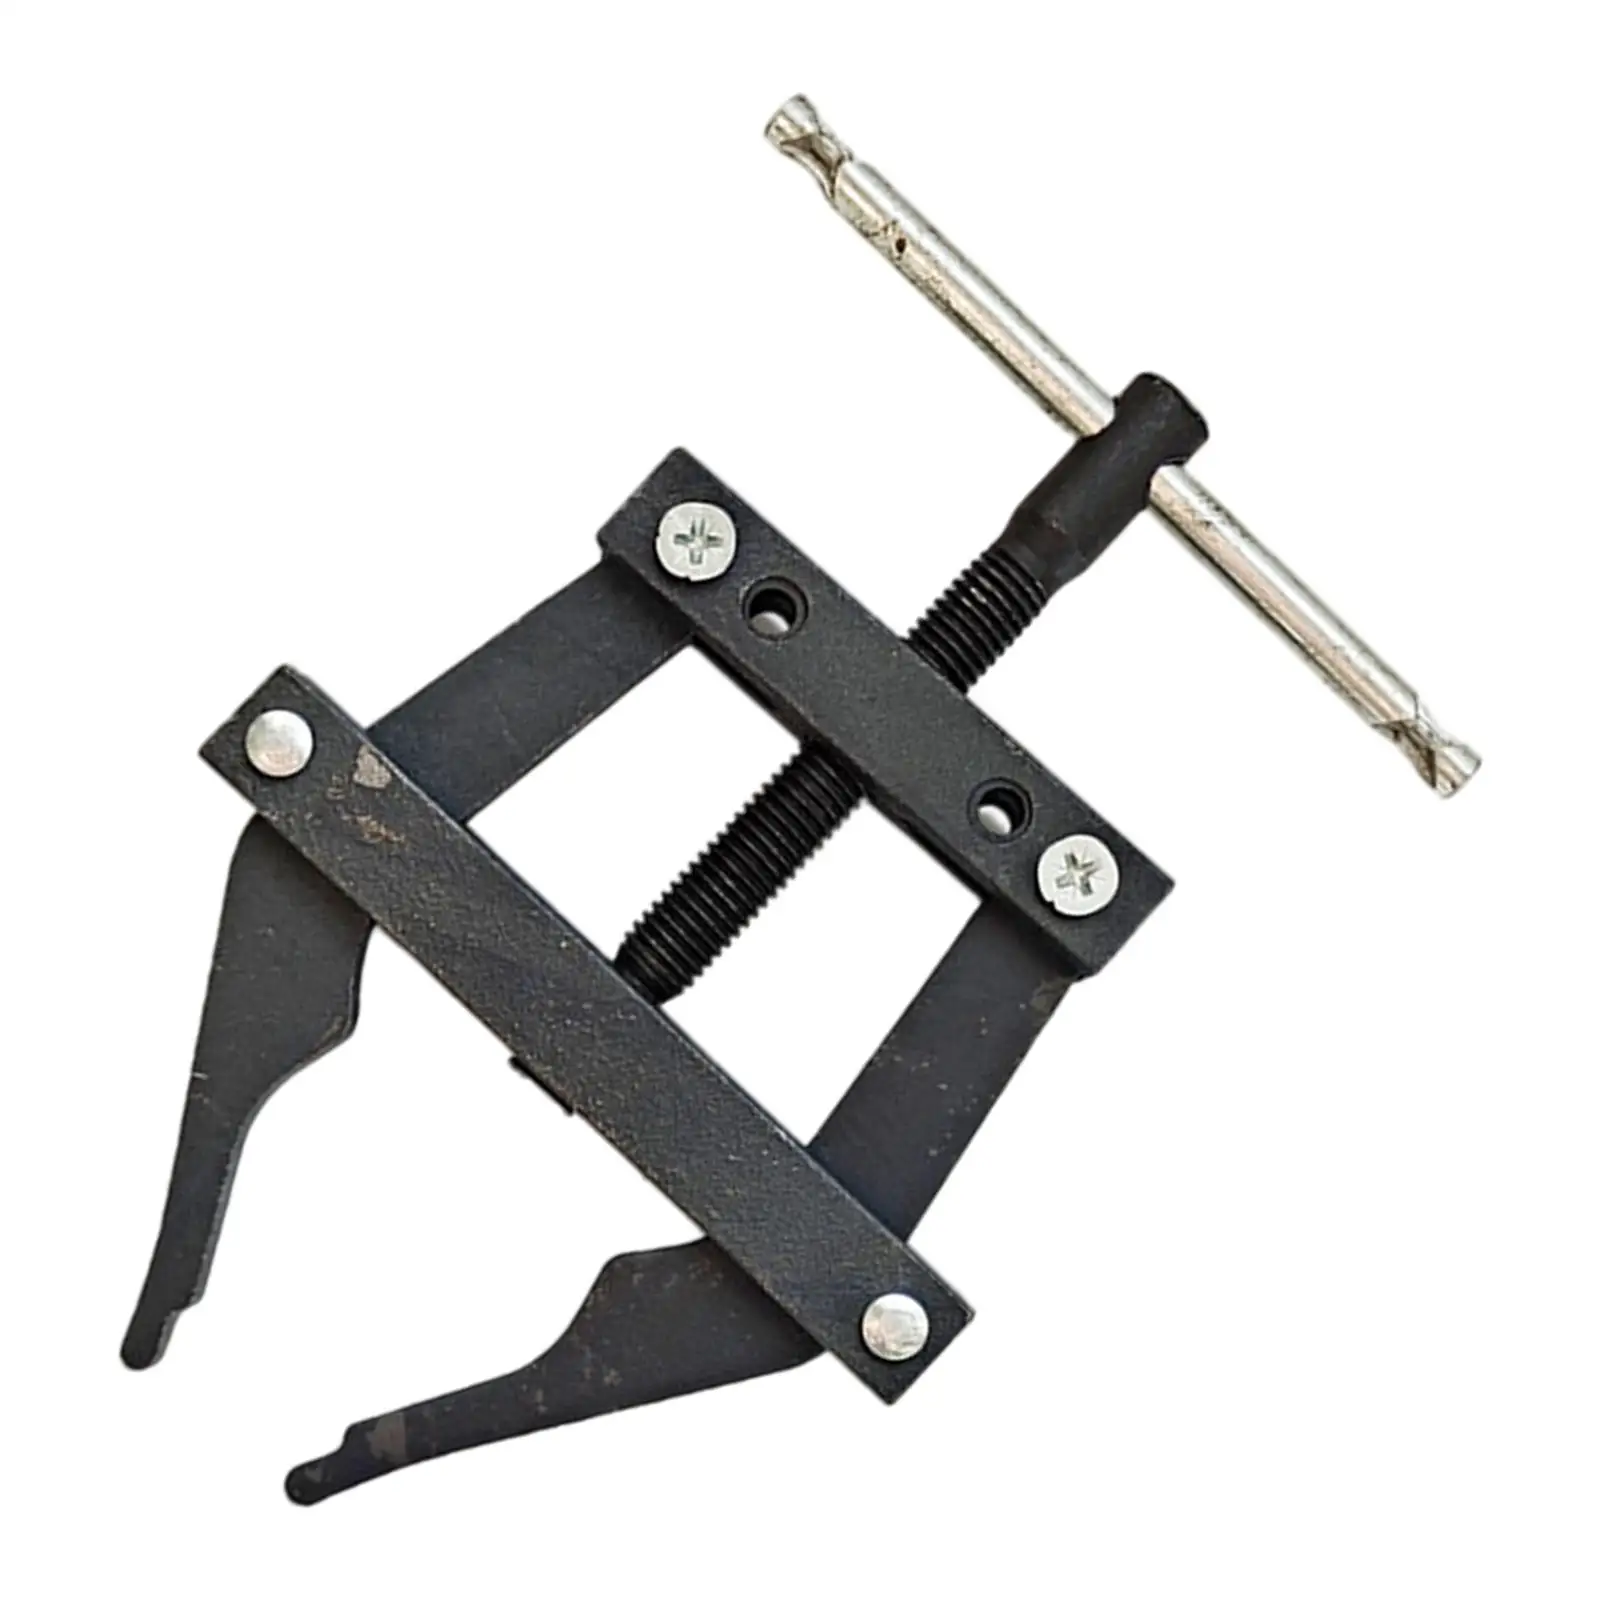 Chain Connecting Tool Cutter Roller Chain Adjuster Puller Holder for 